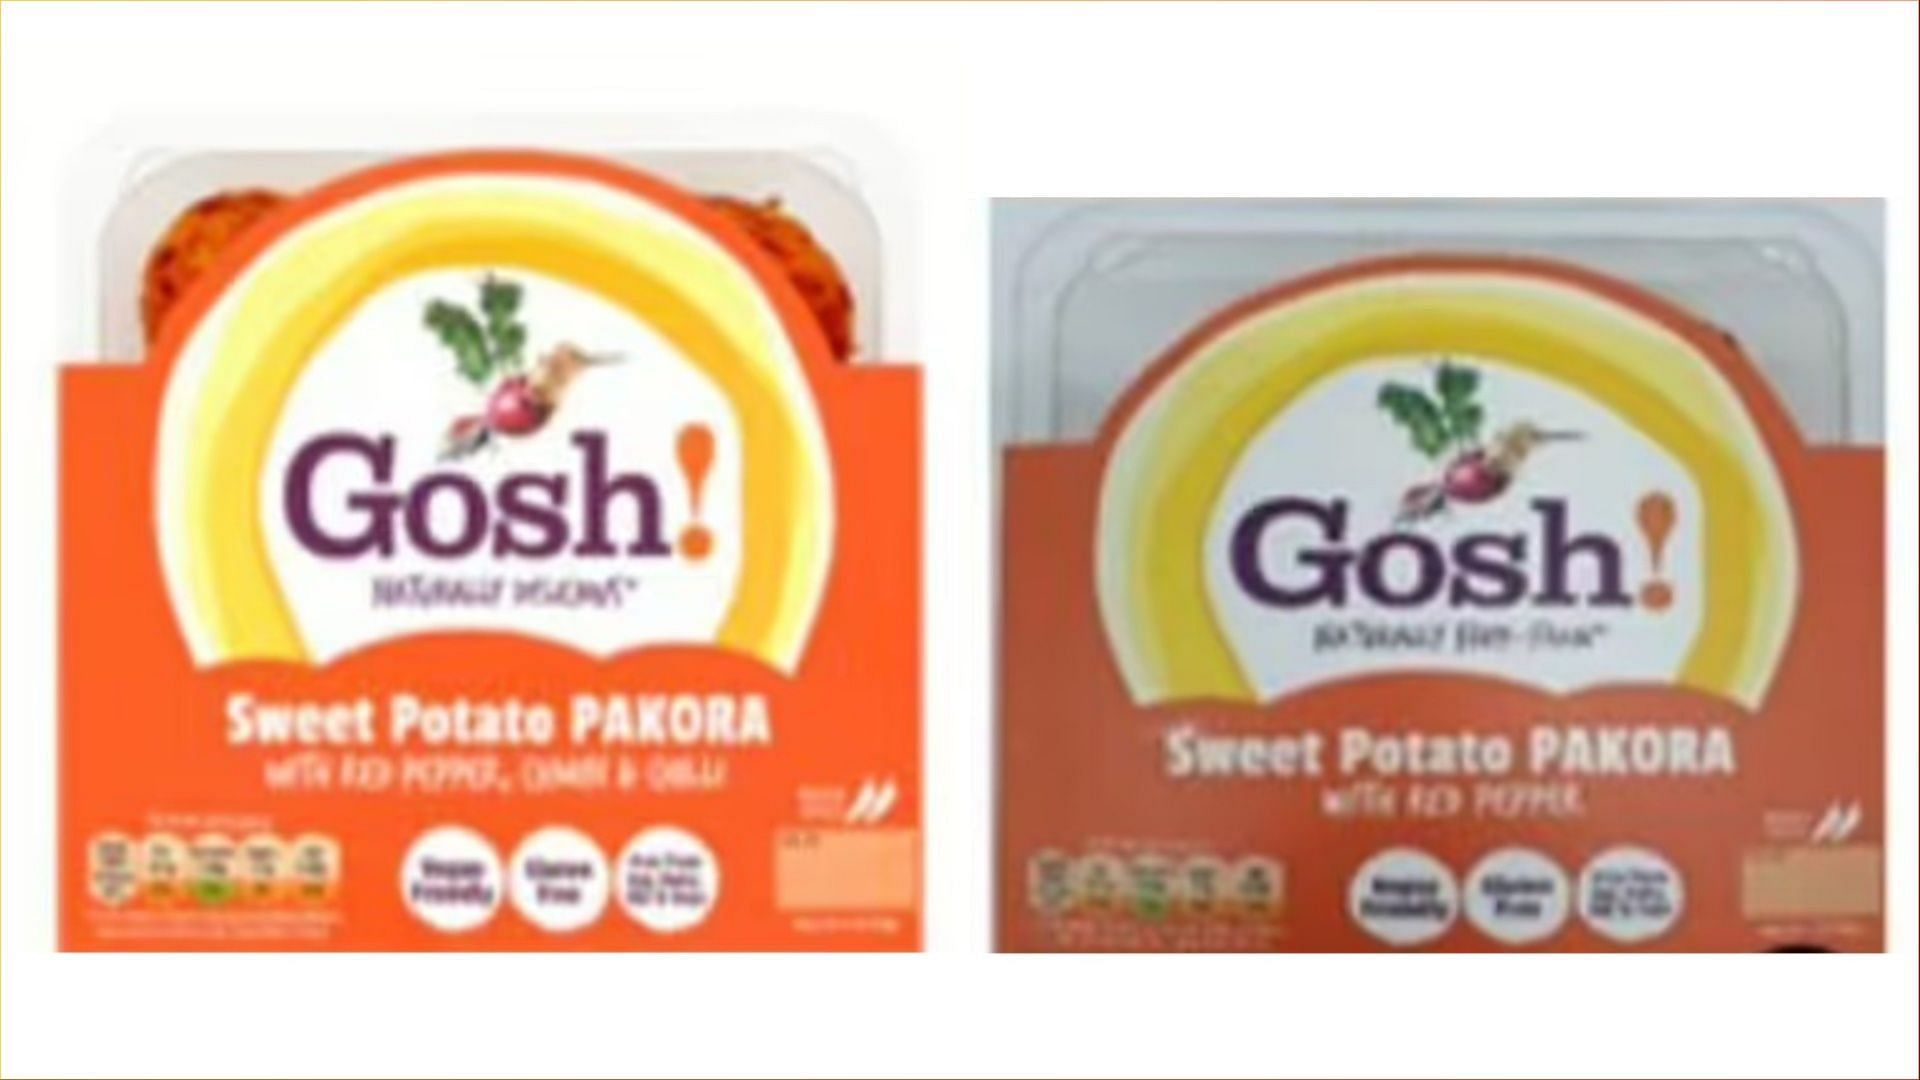 The recalled Gosh! Food Ltd items pose severe to life-threatening allergy risks to people with gluten allergies and sensitivity (Image via Asda/Food Standards Agency)